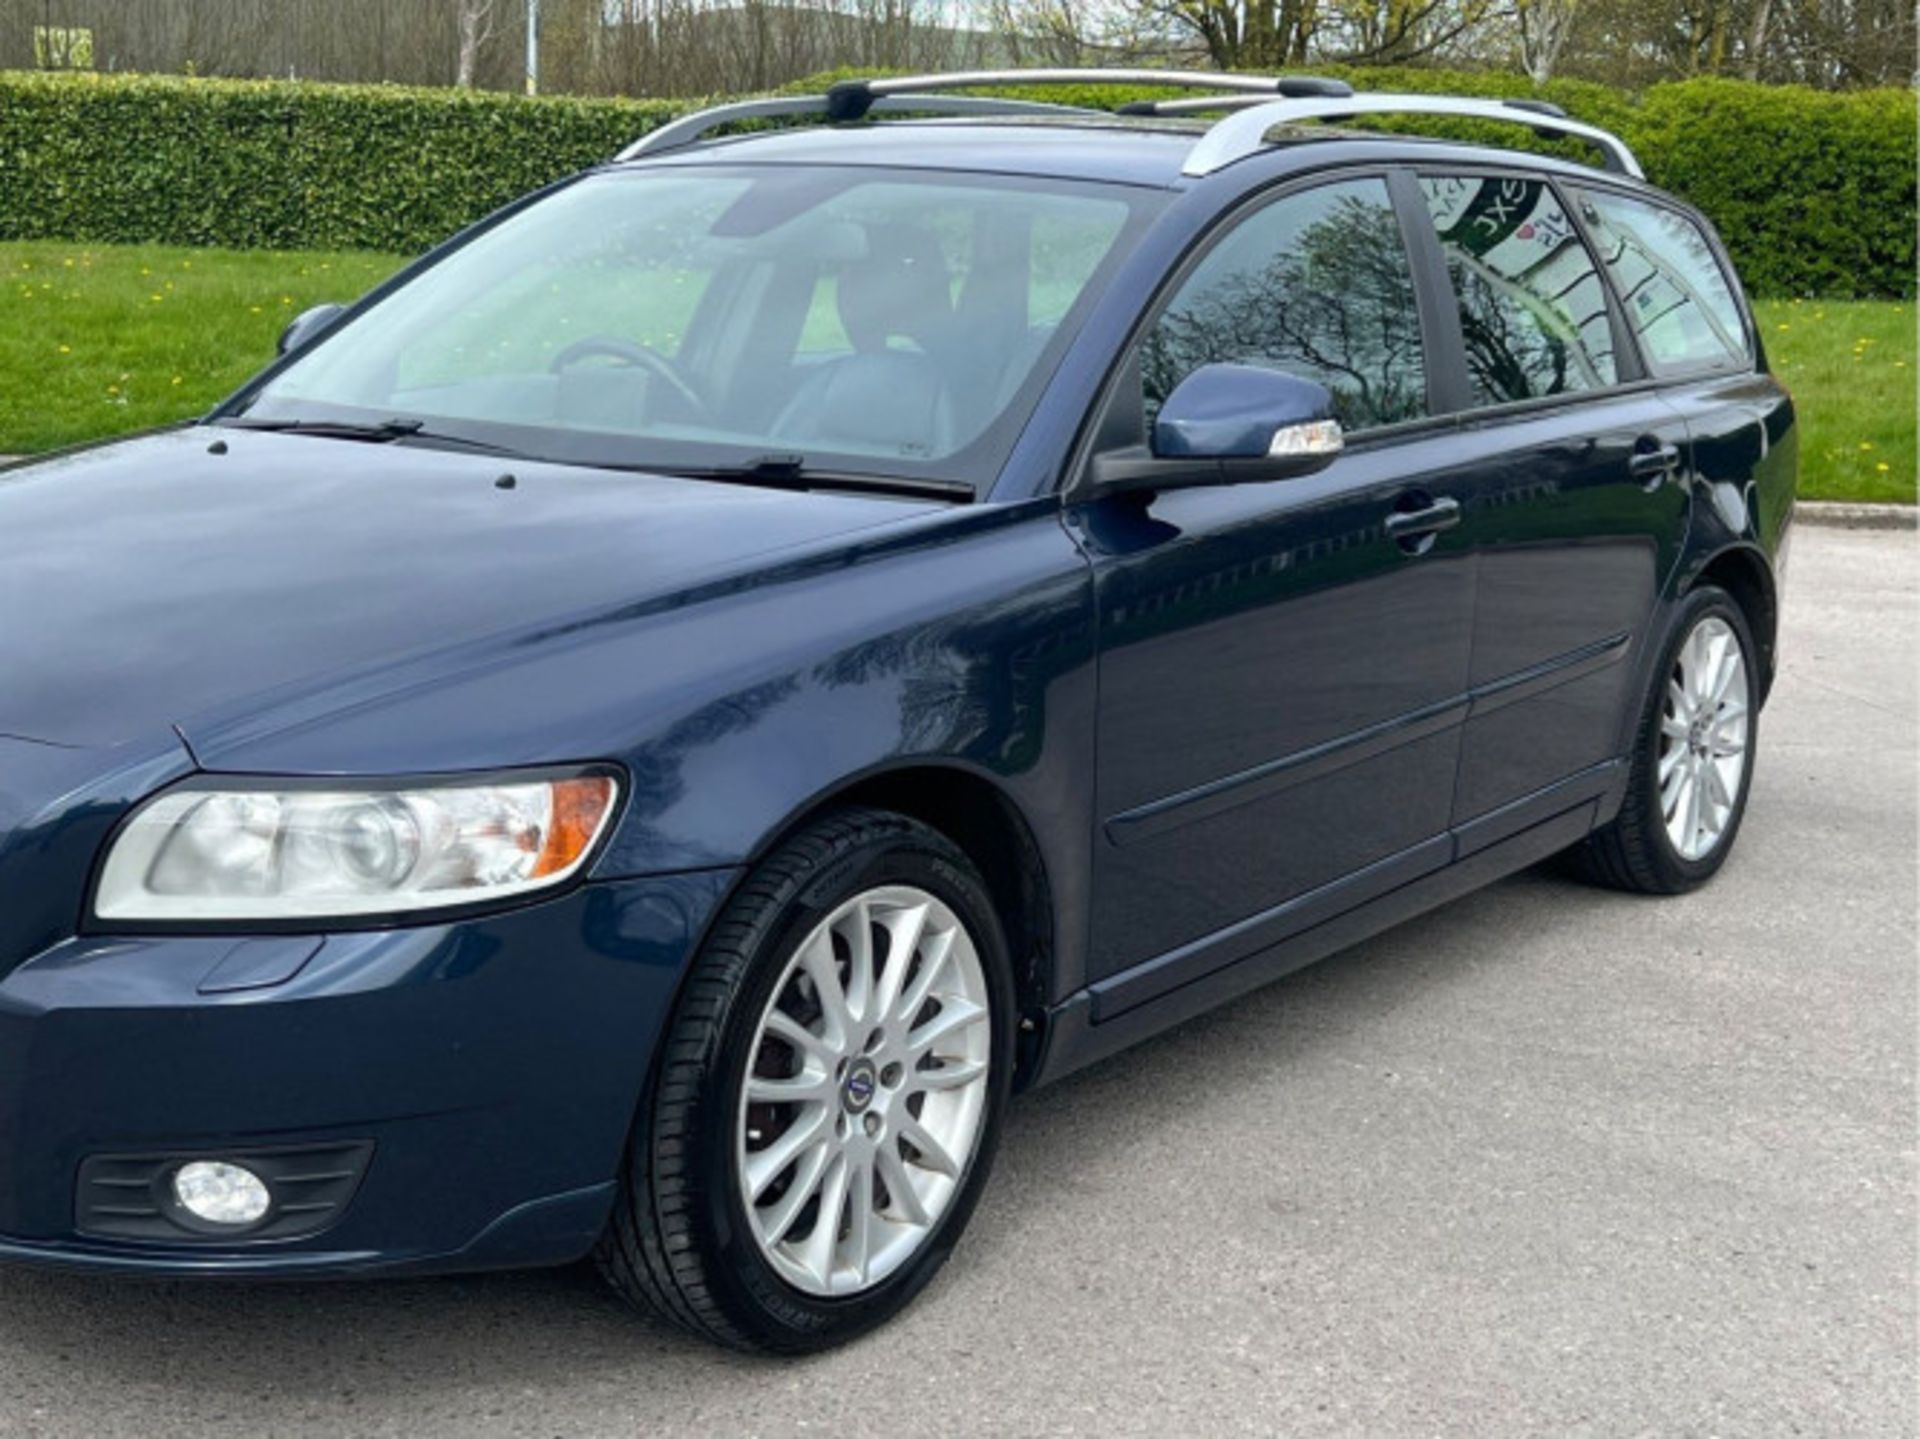 VOLVO V50 1.6D DRIVE SE LUX EDITION EURO 5 (S/S) 5DR (2012) - Image 87 of 88